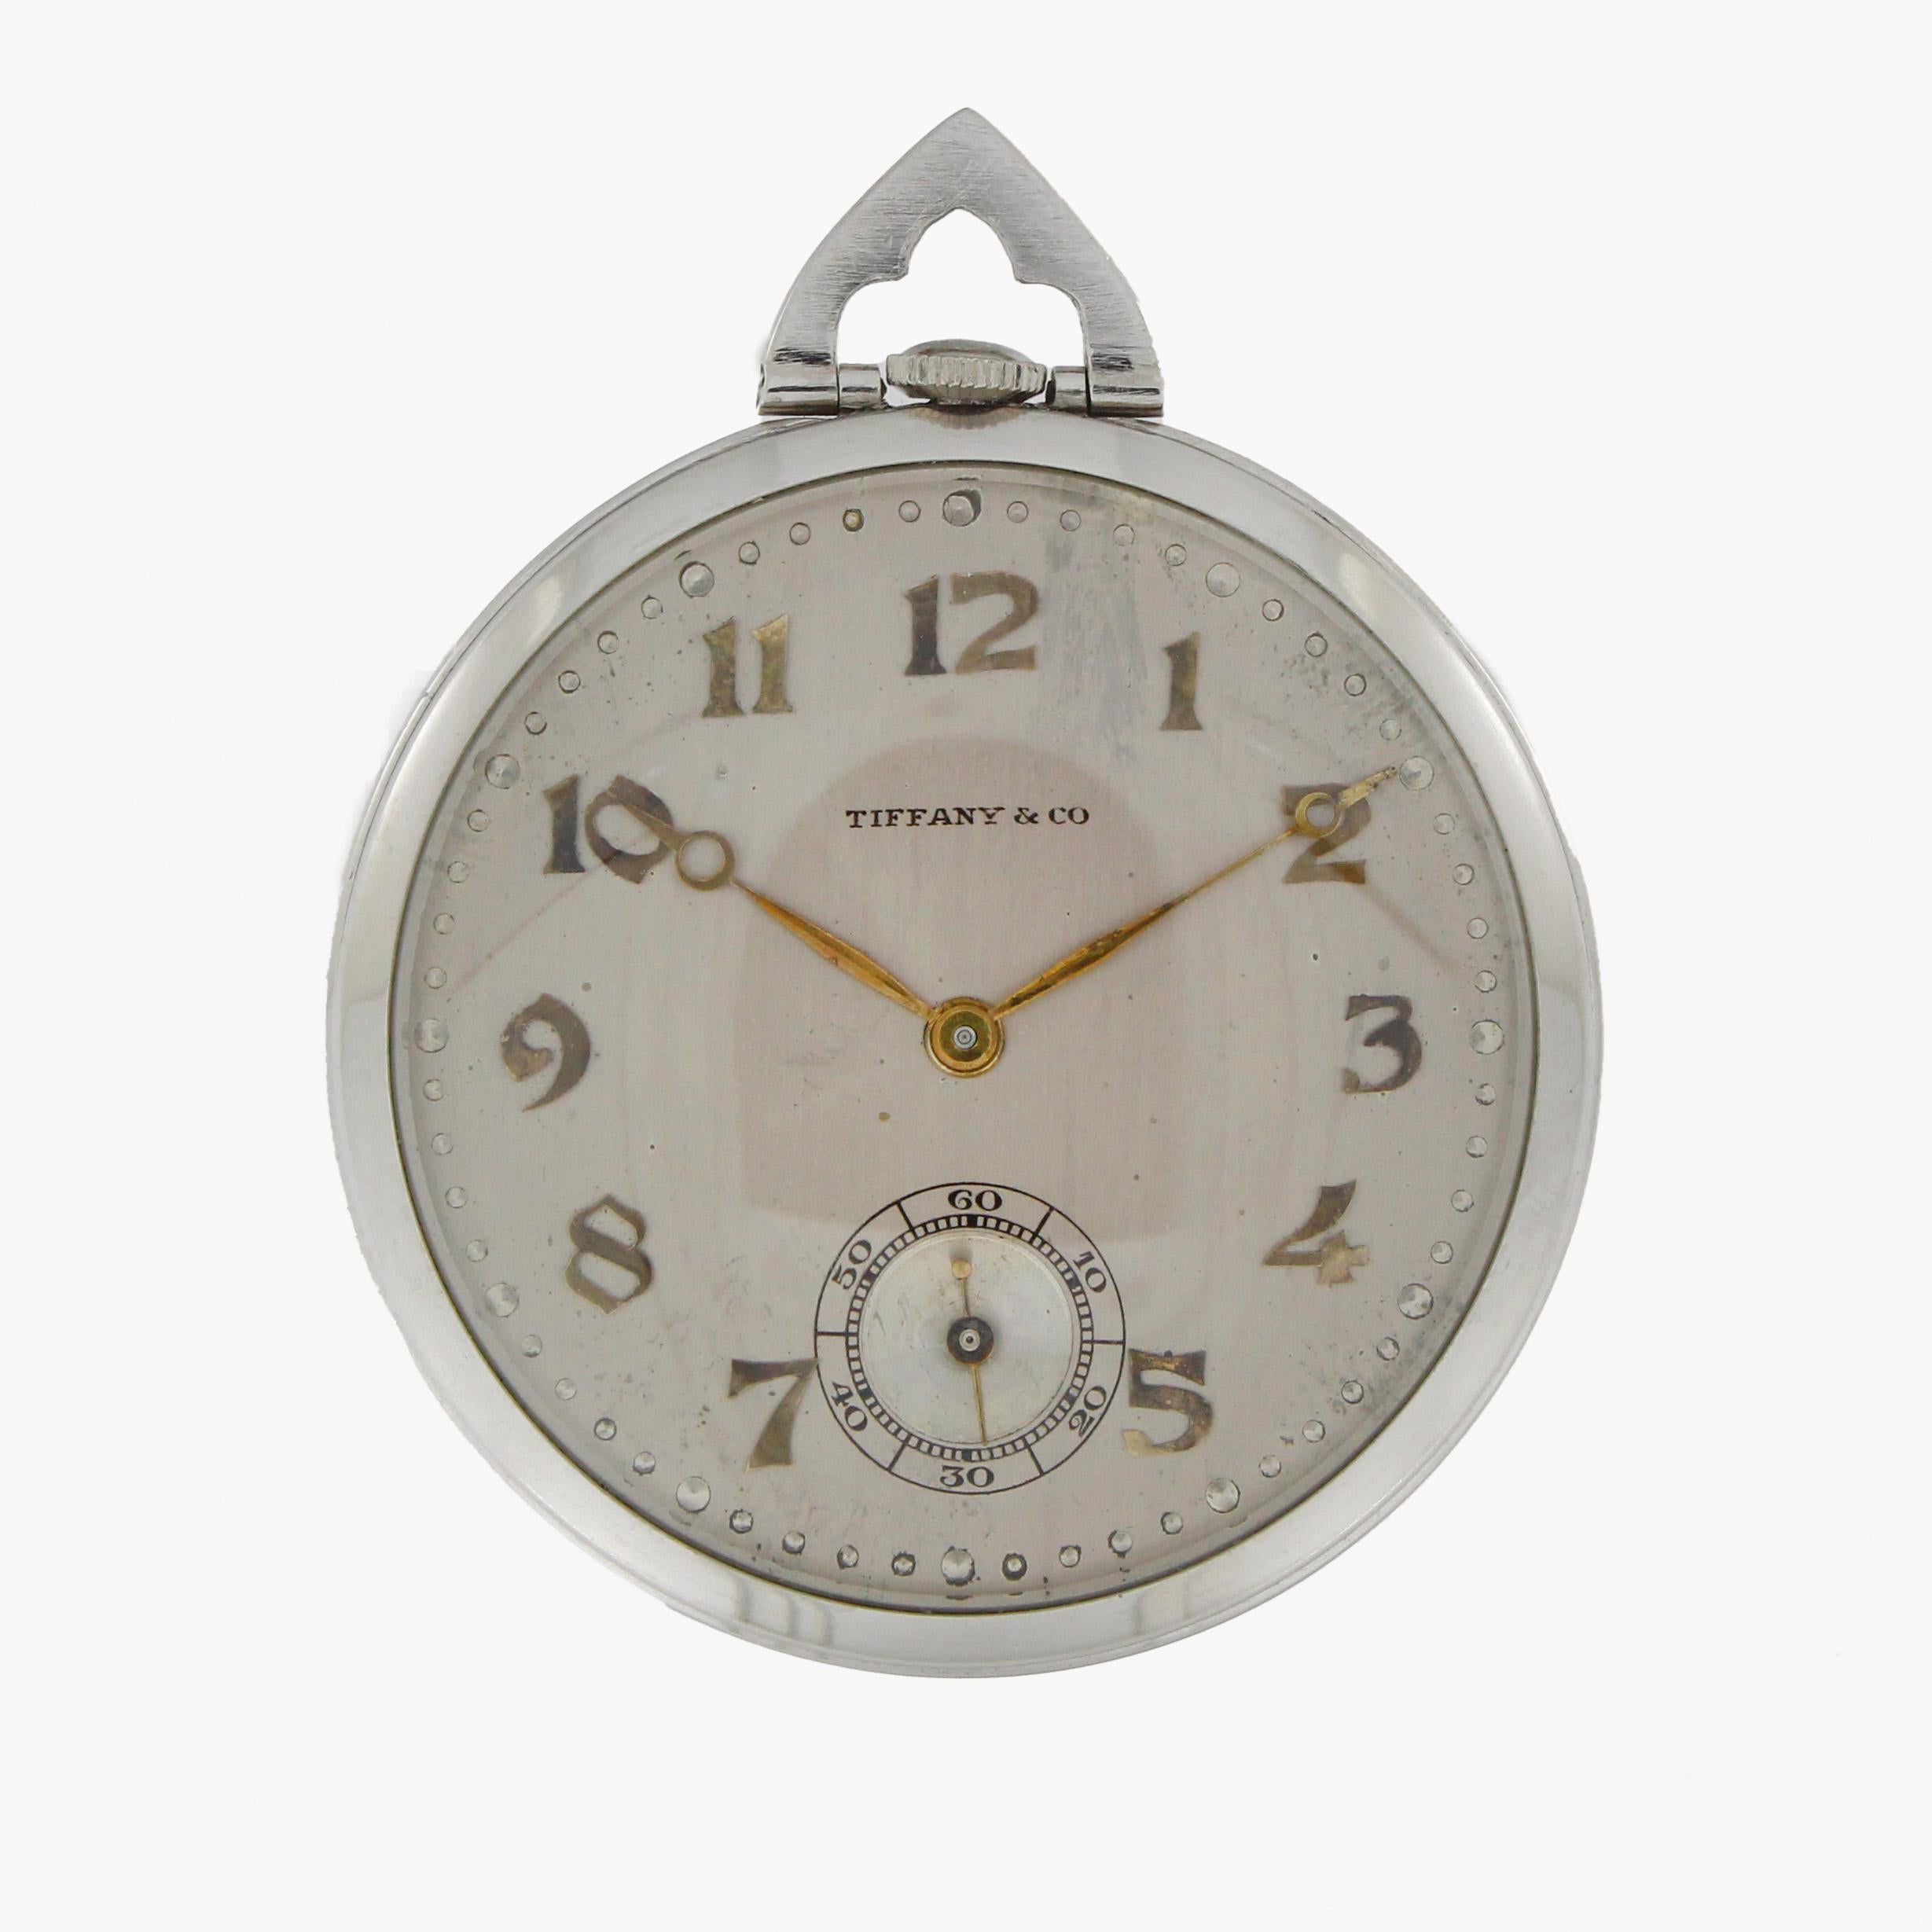 Tiffany & Co. Pocketwatch with a silver colored dial, brass colored numbers and hands with a 42mm diameter platinum case. Manual winding movement by Touchon & Co. with 19 jewels